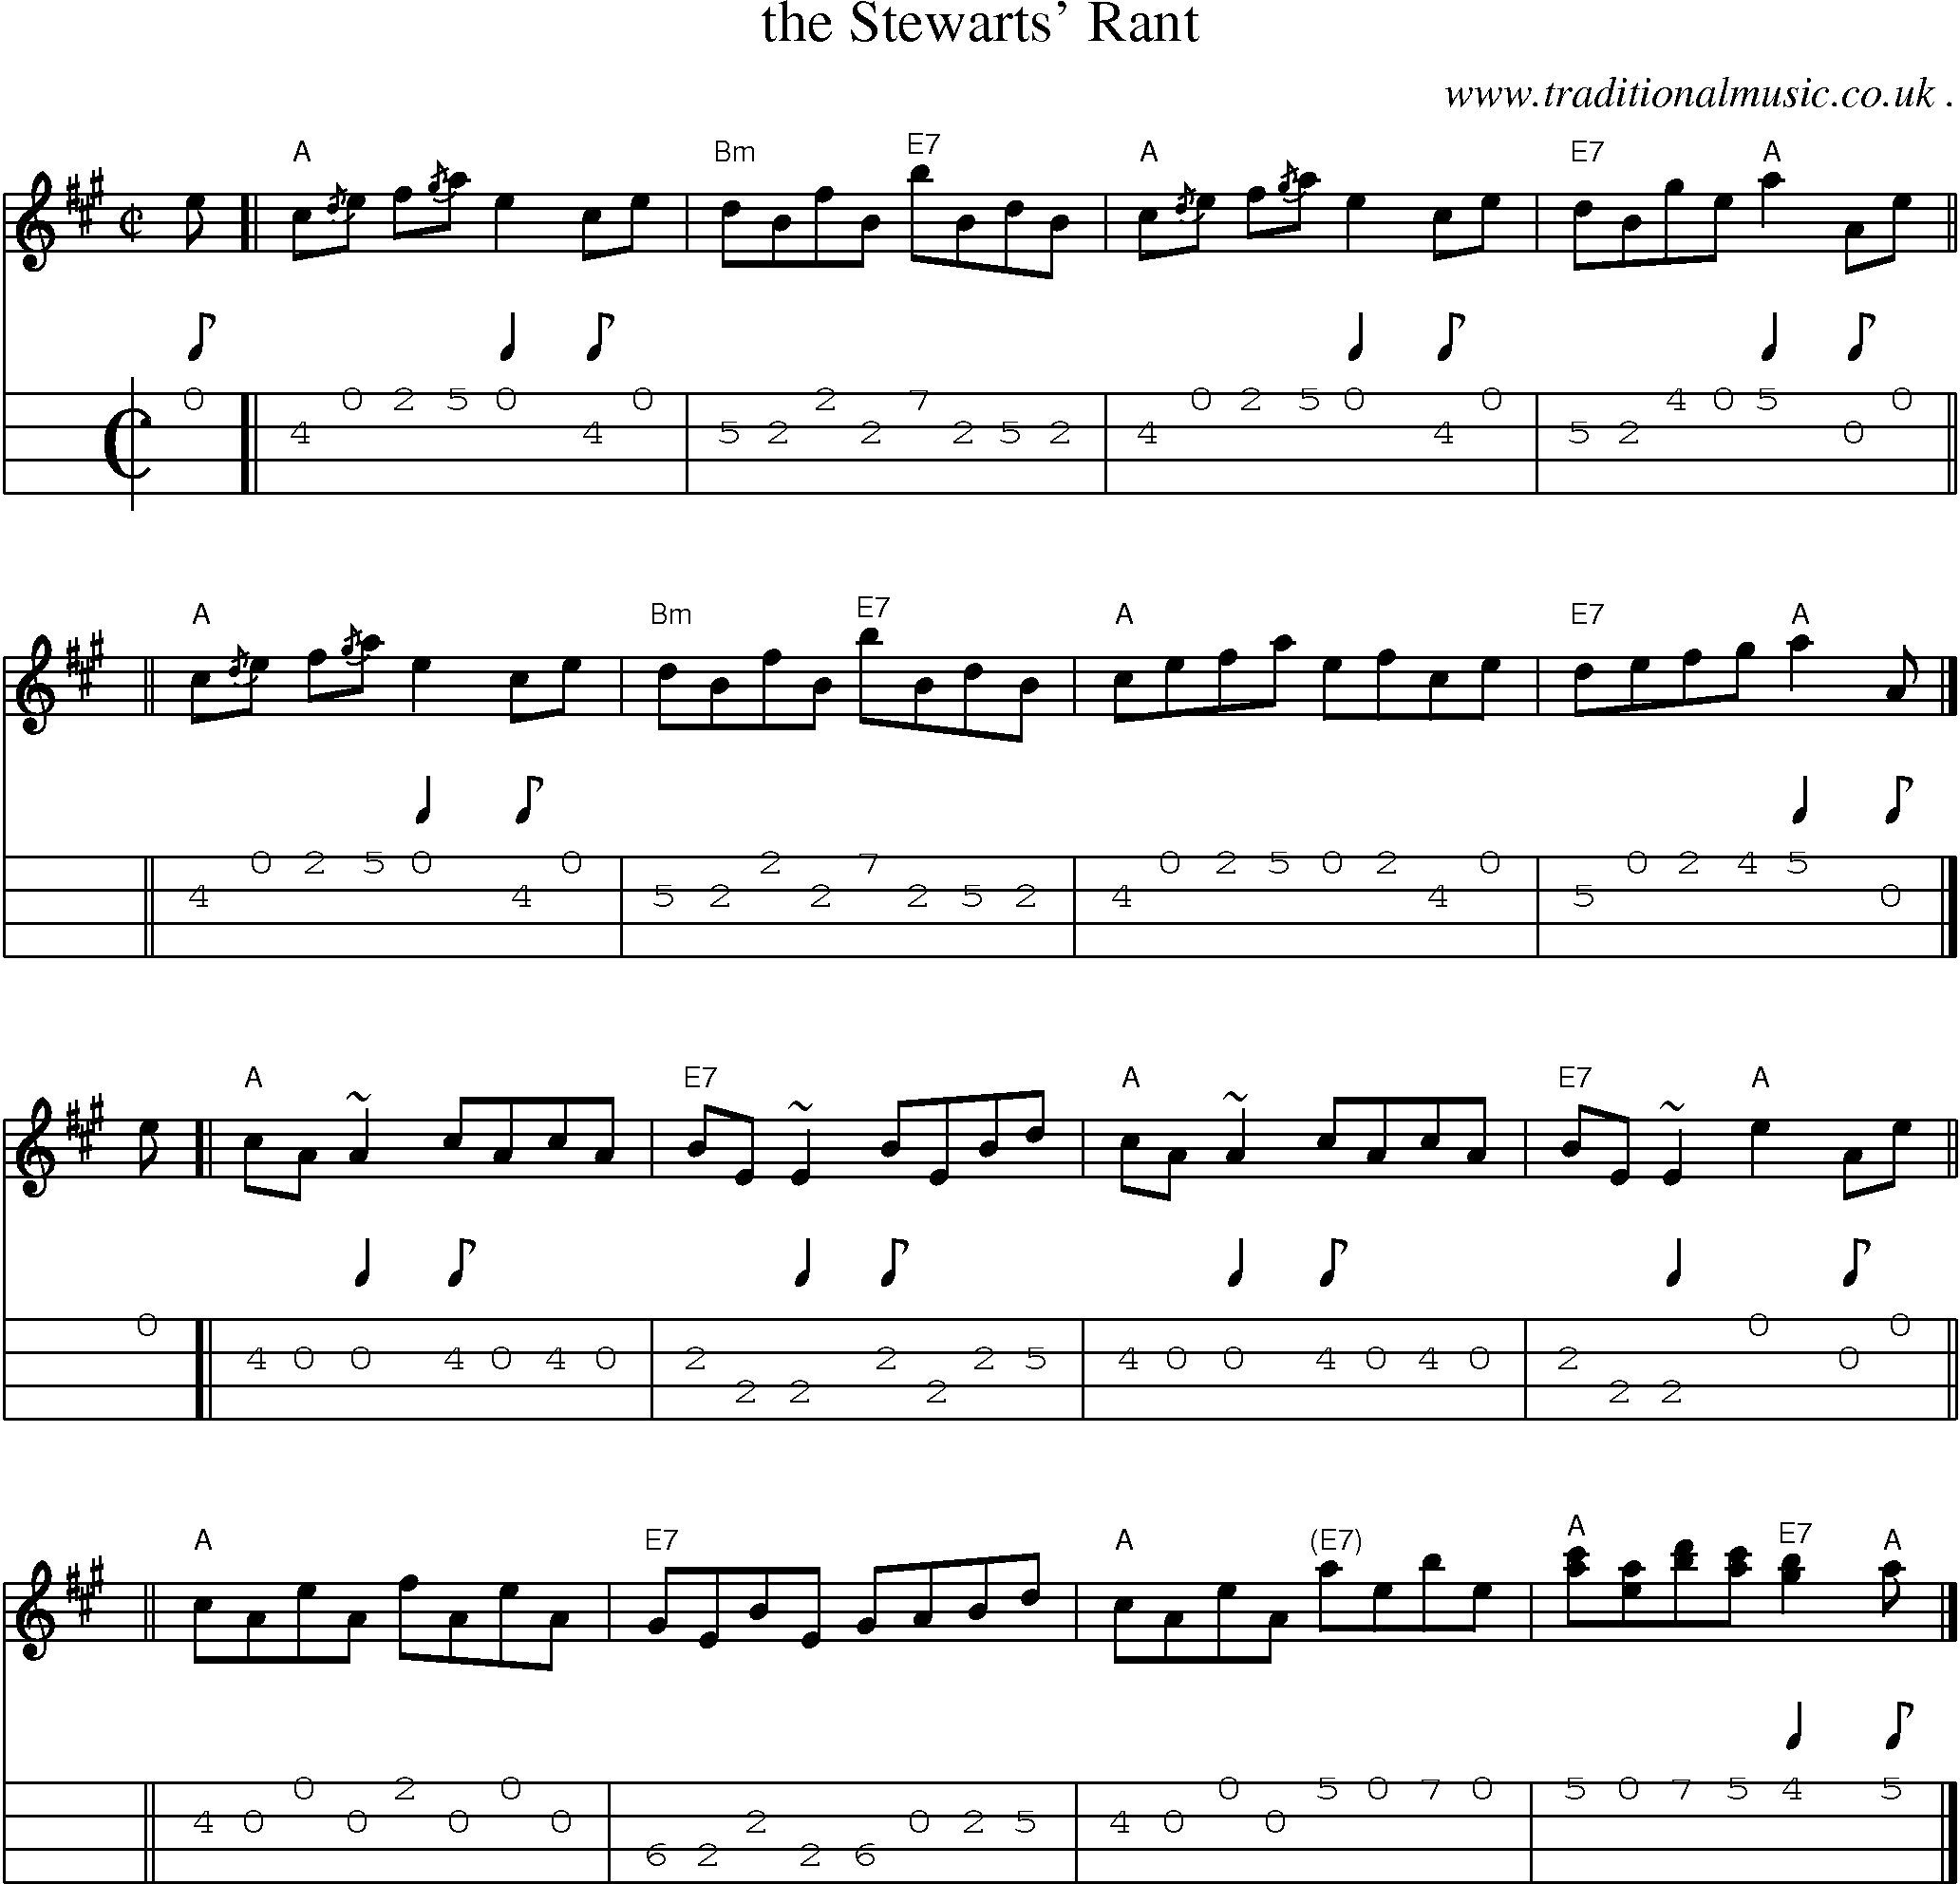 Sheet-music  score, Chords and Mandolin Tabs for The Stewarts Rant